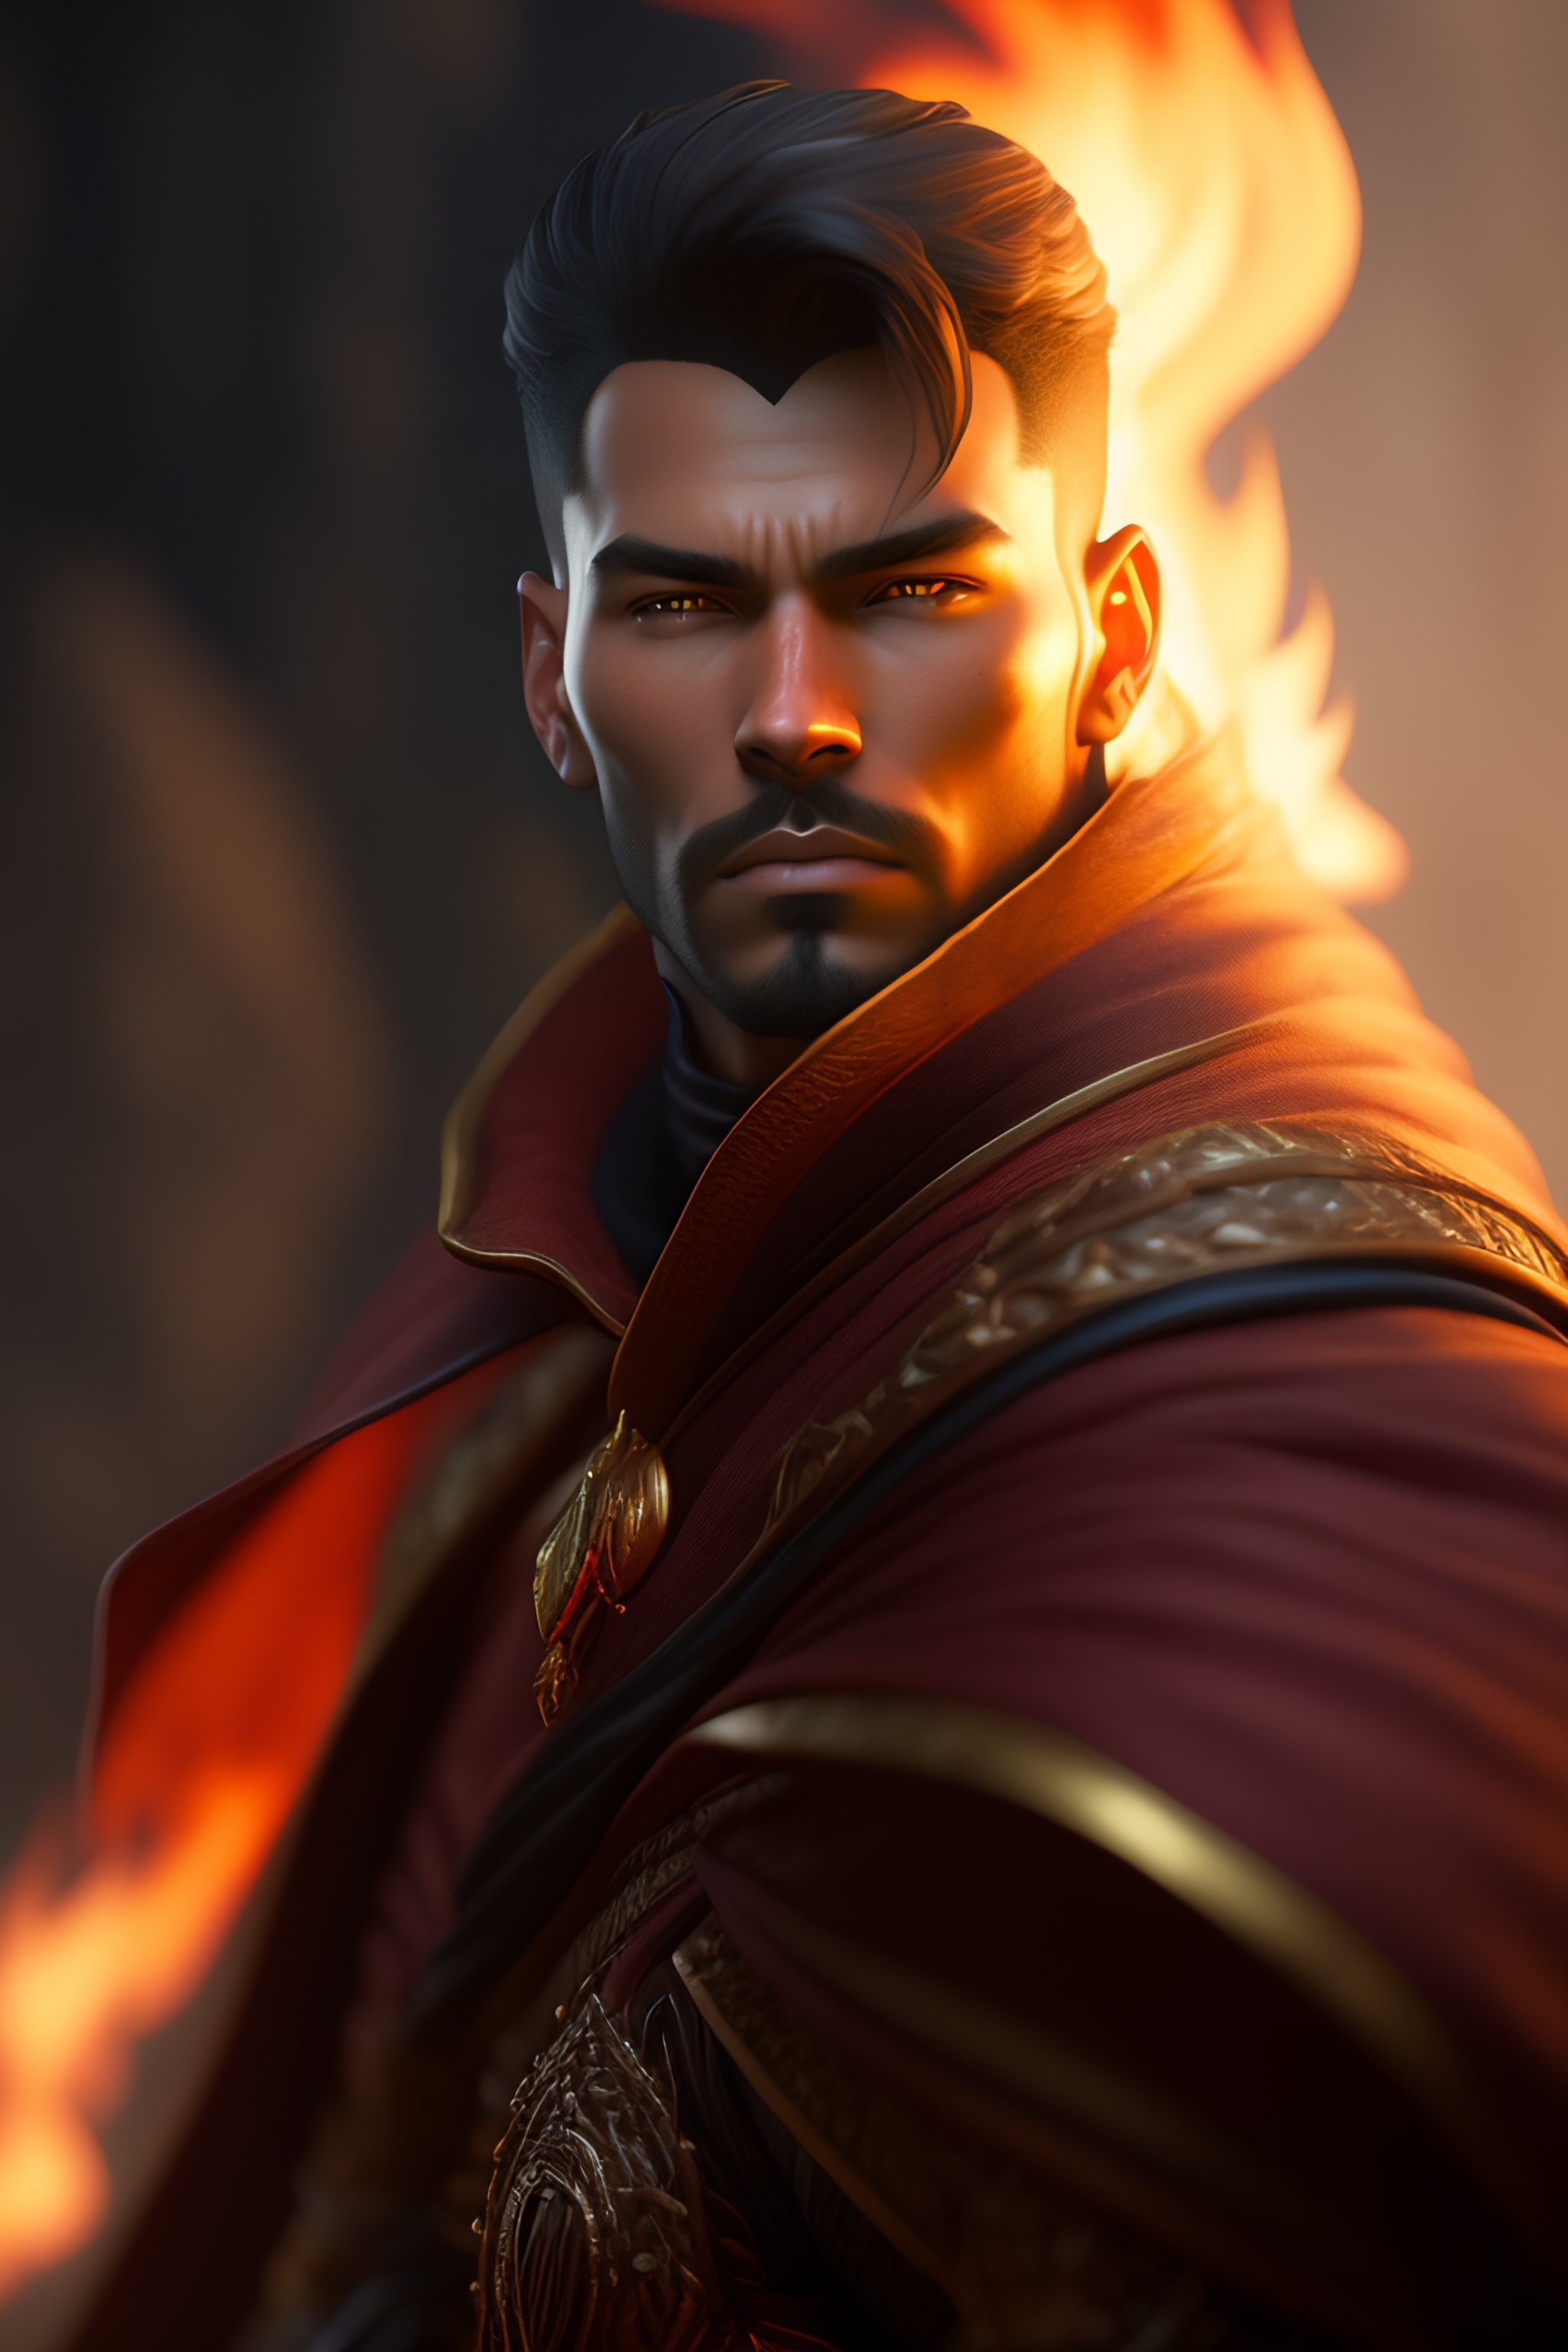 lexica-dungeons-and-dragons-male-fire-mage-character-closeup-portrait-dramatic-light-epic